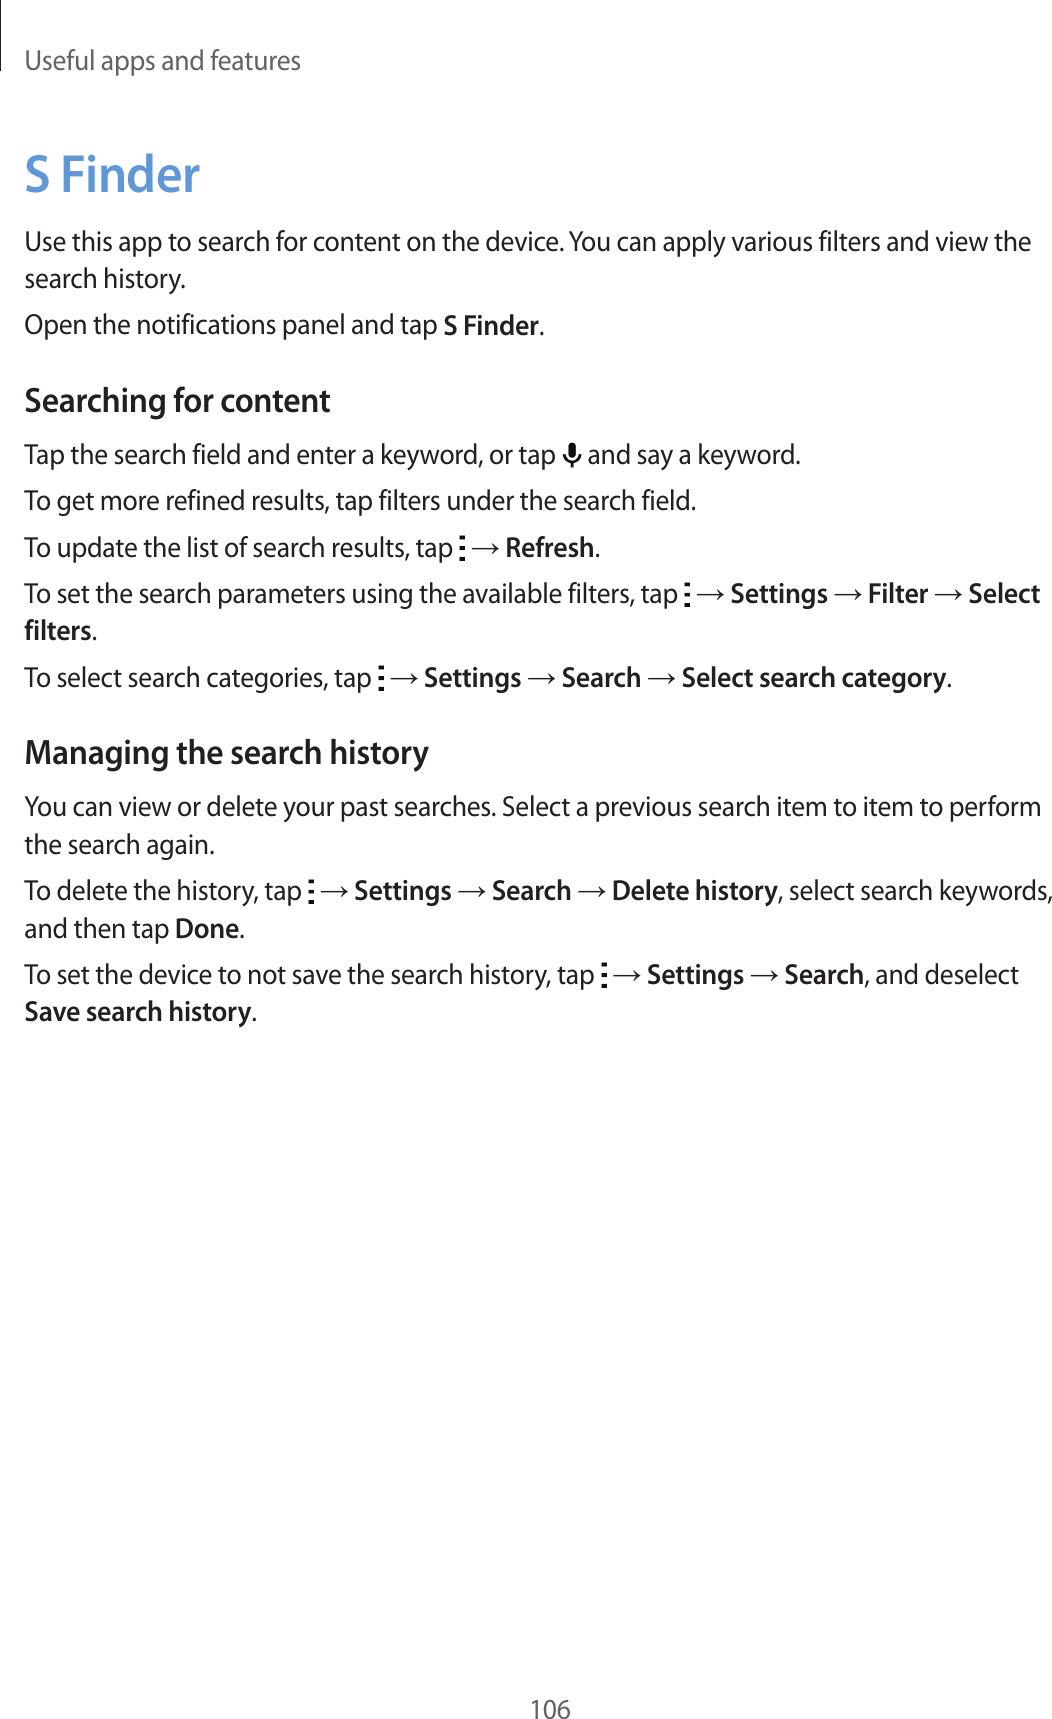 Useful apps and features106S FinderUse this app to search for content on the device. You can apply various filters and view the search history.Open the notifications panel and tap S Finder.Searching for contentTap the search field and enter a keyword, or tap   and say a keyword.To get more refined results, tap filters under the search field.To update the list of search results, tap   → Refresh.To set the search parameters using the available filters, tap   → Settings → Filter → Select filters.To select search categories, tap   → Settings → Search → Select search category.Managing the search historyYou can view or delete your past searches. Select a previous search item to item to perform the search again.To delete the history, tap   → Settings → Search → Delete history, select search keywords, and then tap Done.To set the device to not save the search history, tap   → Settings → Search, and deselect Save search history.